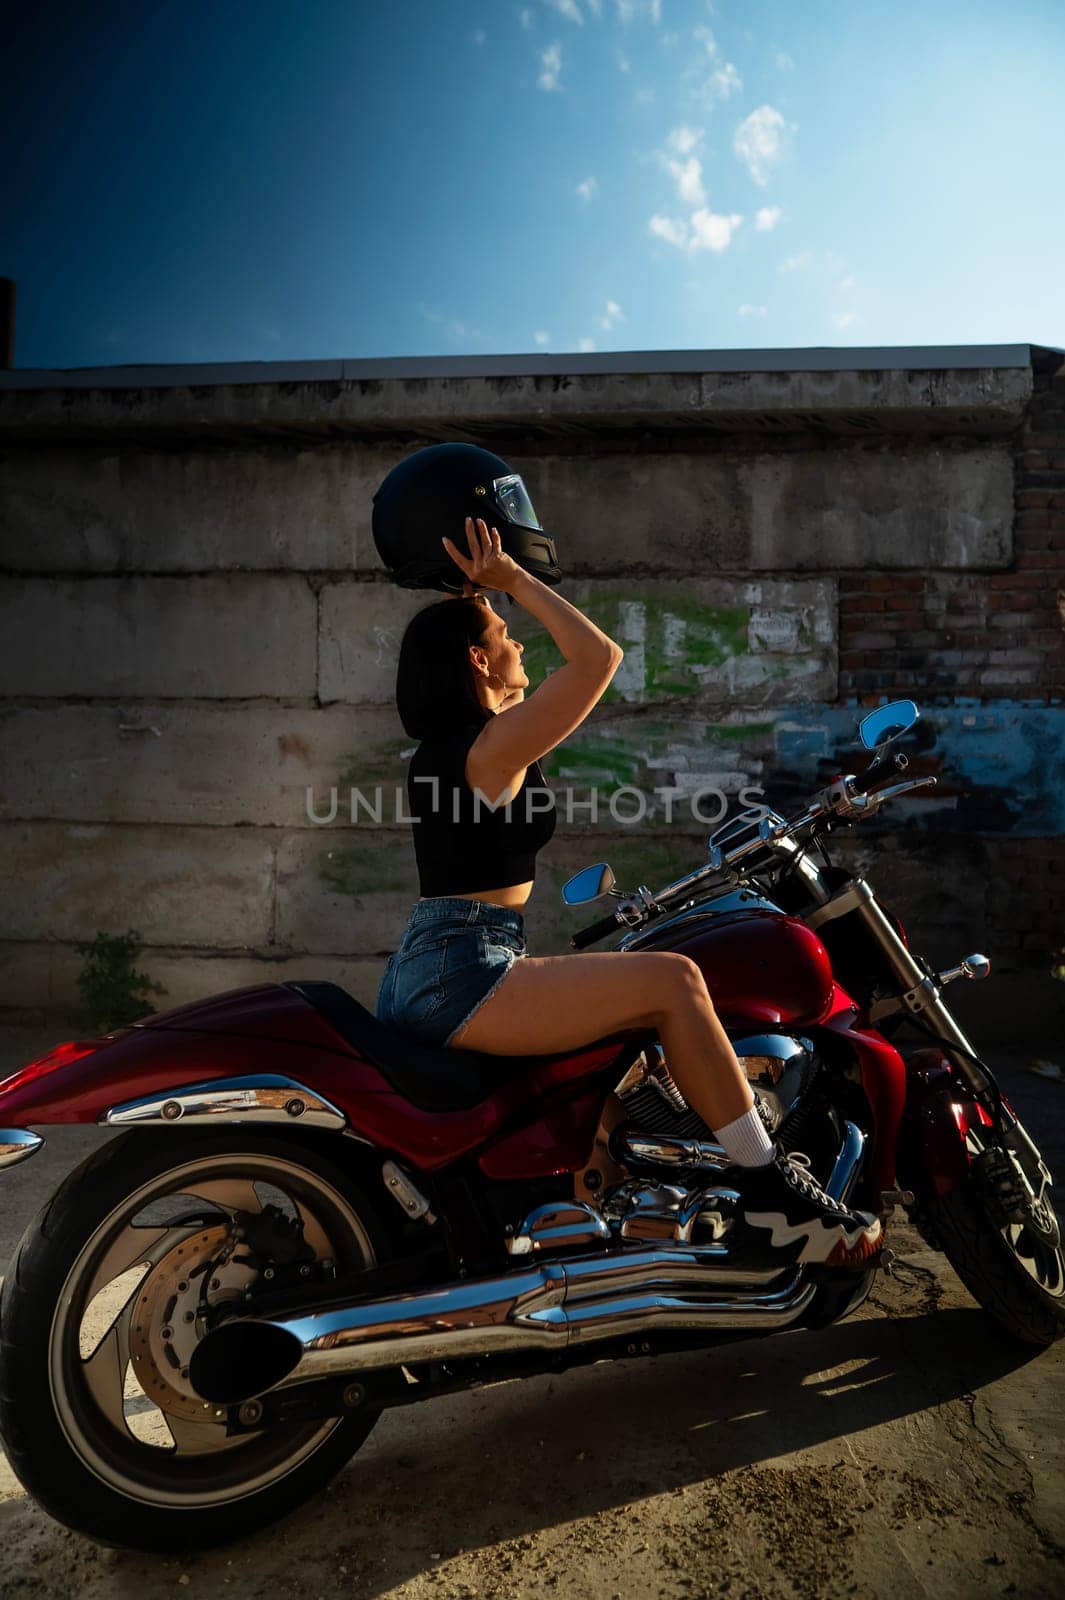 A brunette woman in denim shorts puts on a helmet while sitting on a red motorcycle. Vertical photo. by mrwed54